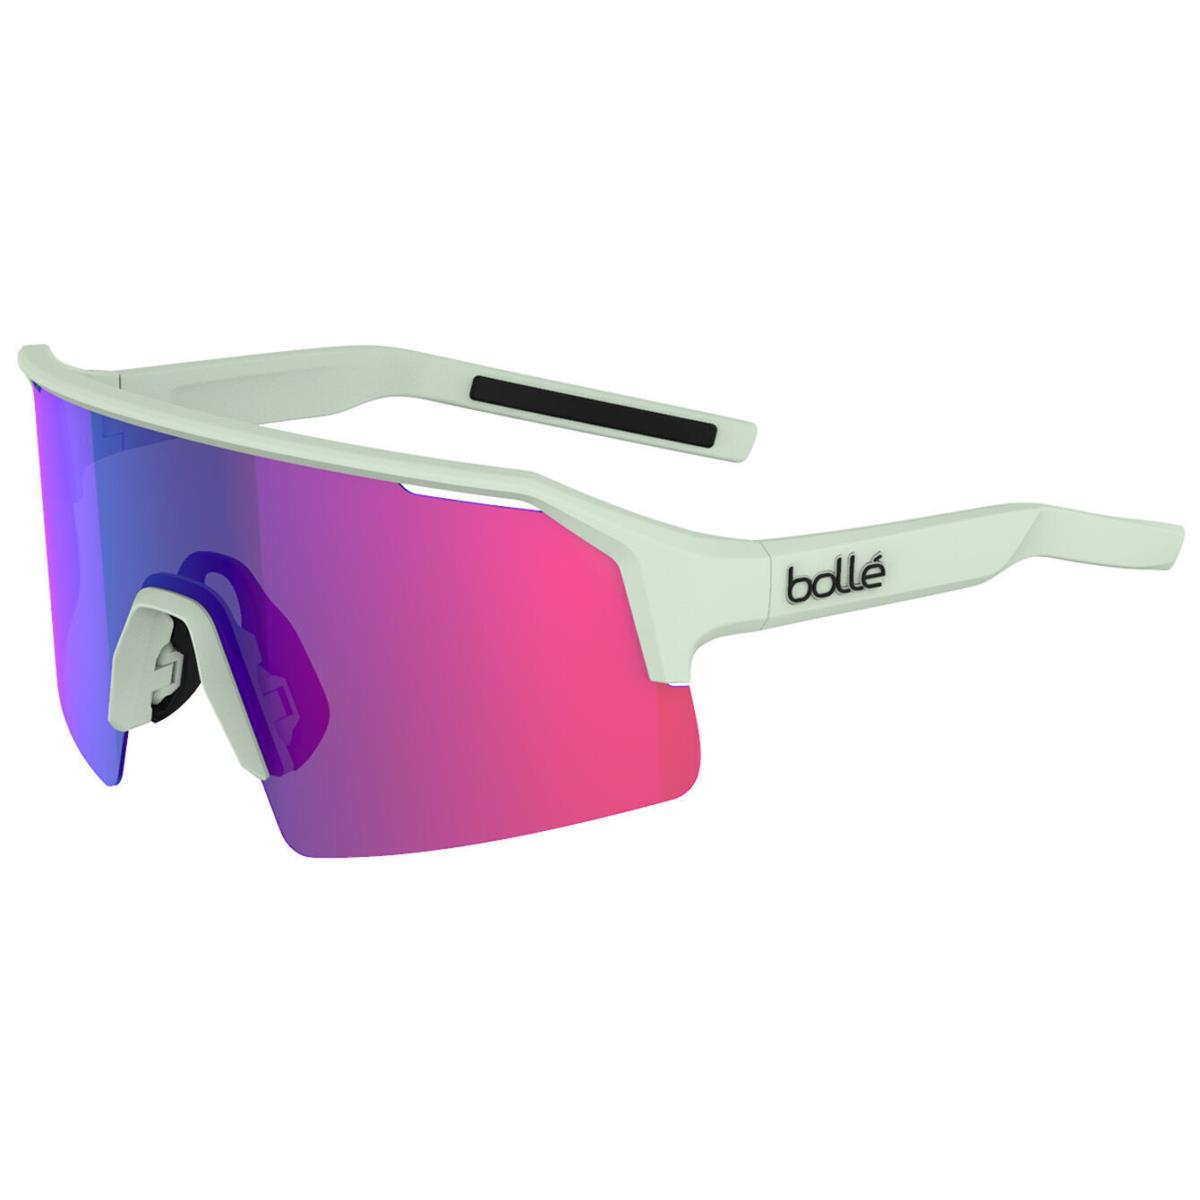 Bolle C-shifter Performance Sunglasses